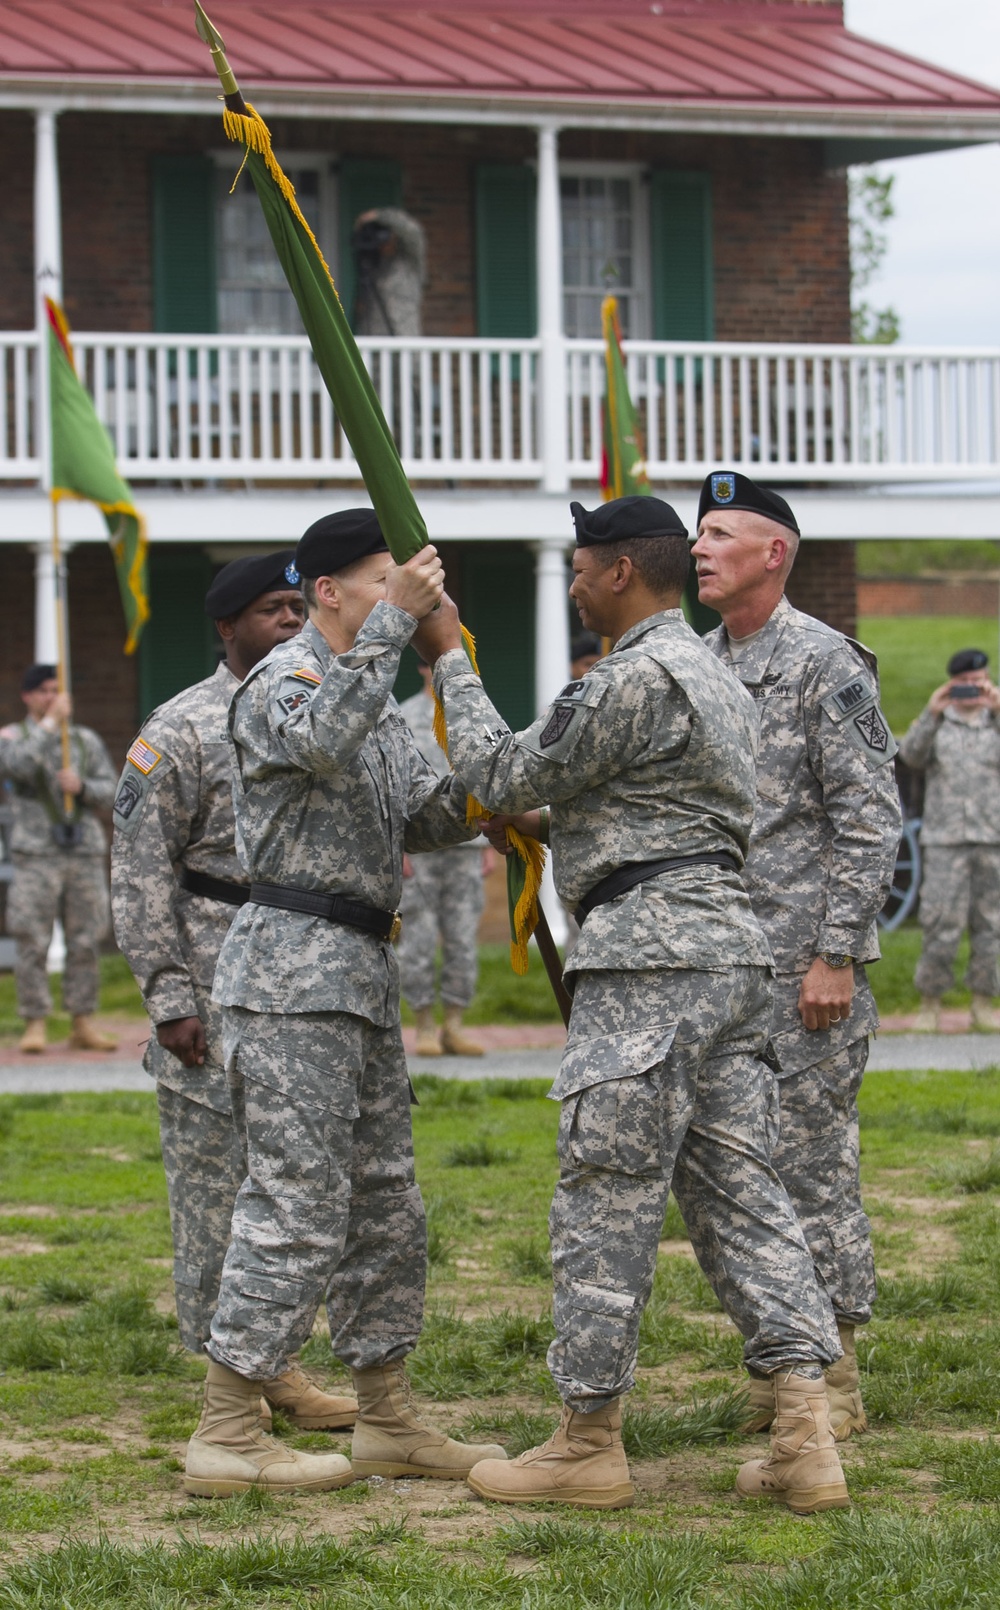 Holman relinquishes command of military police unit at Fort McHenry ceremony